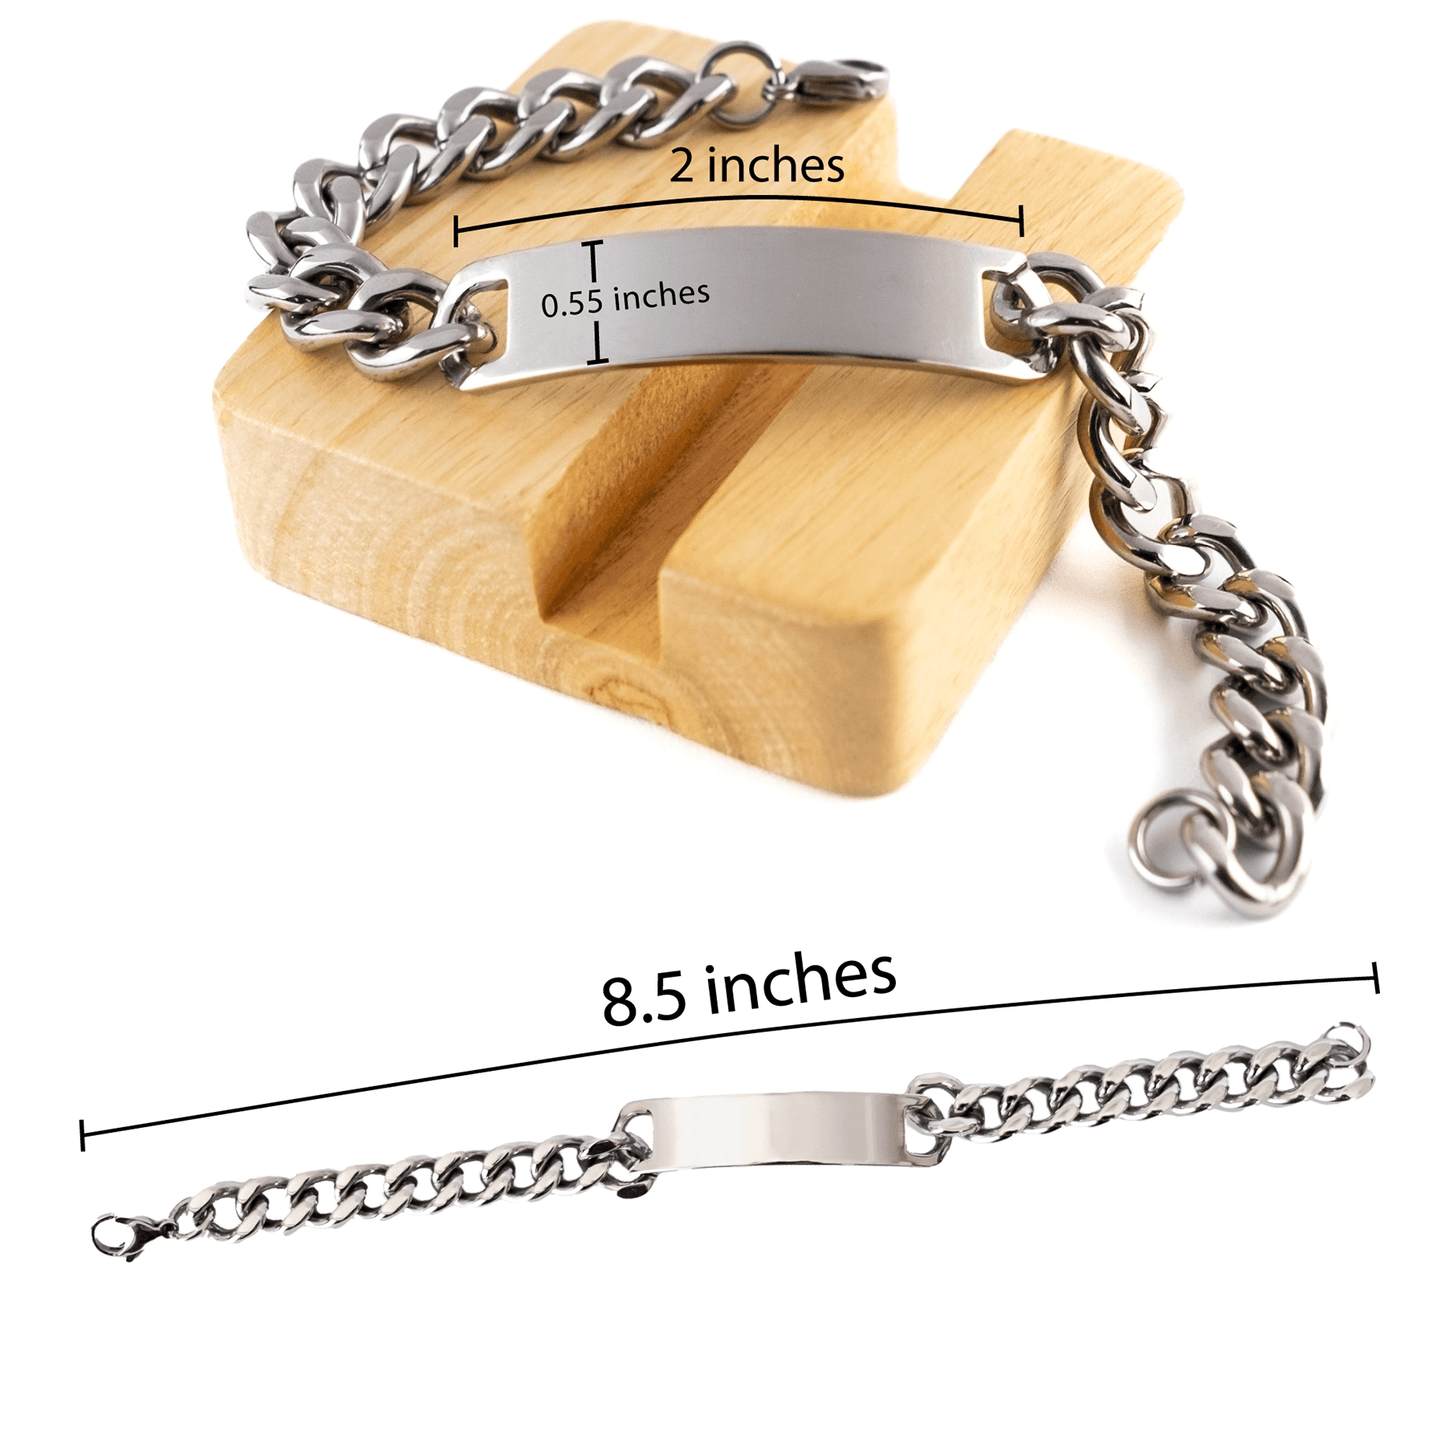 I Left My Heart In Illinois Gifts, Meaningful Illinois State for Friends, Men, Women. Cuban Chain Stainless Steel Bracelet for Illinois People - Mallard Moon Gift Shop